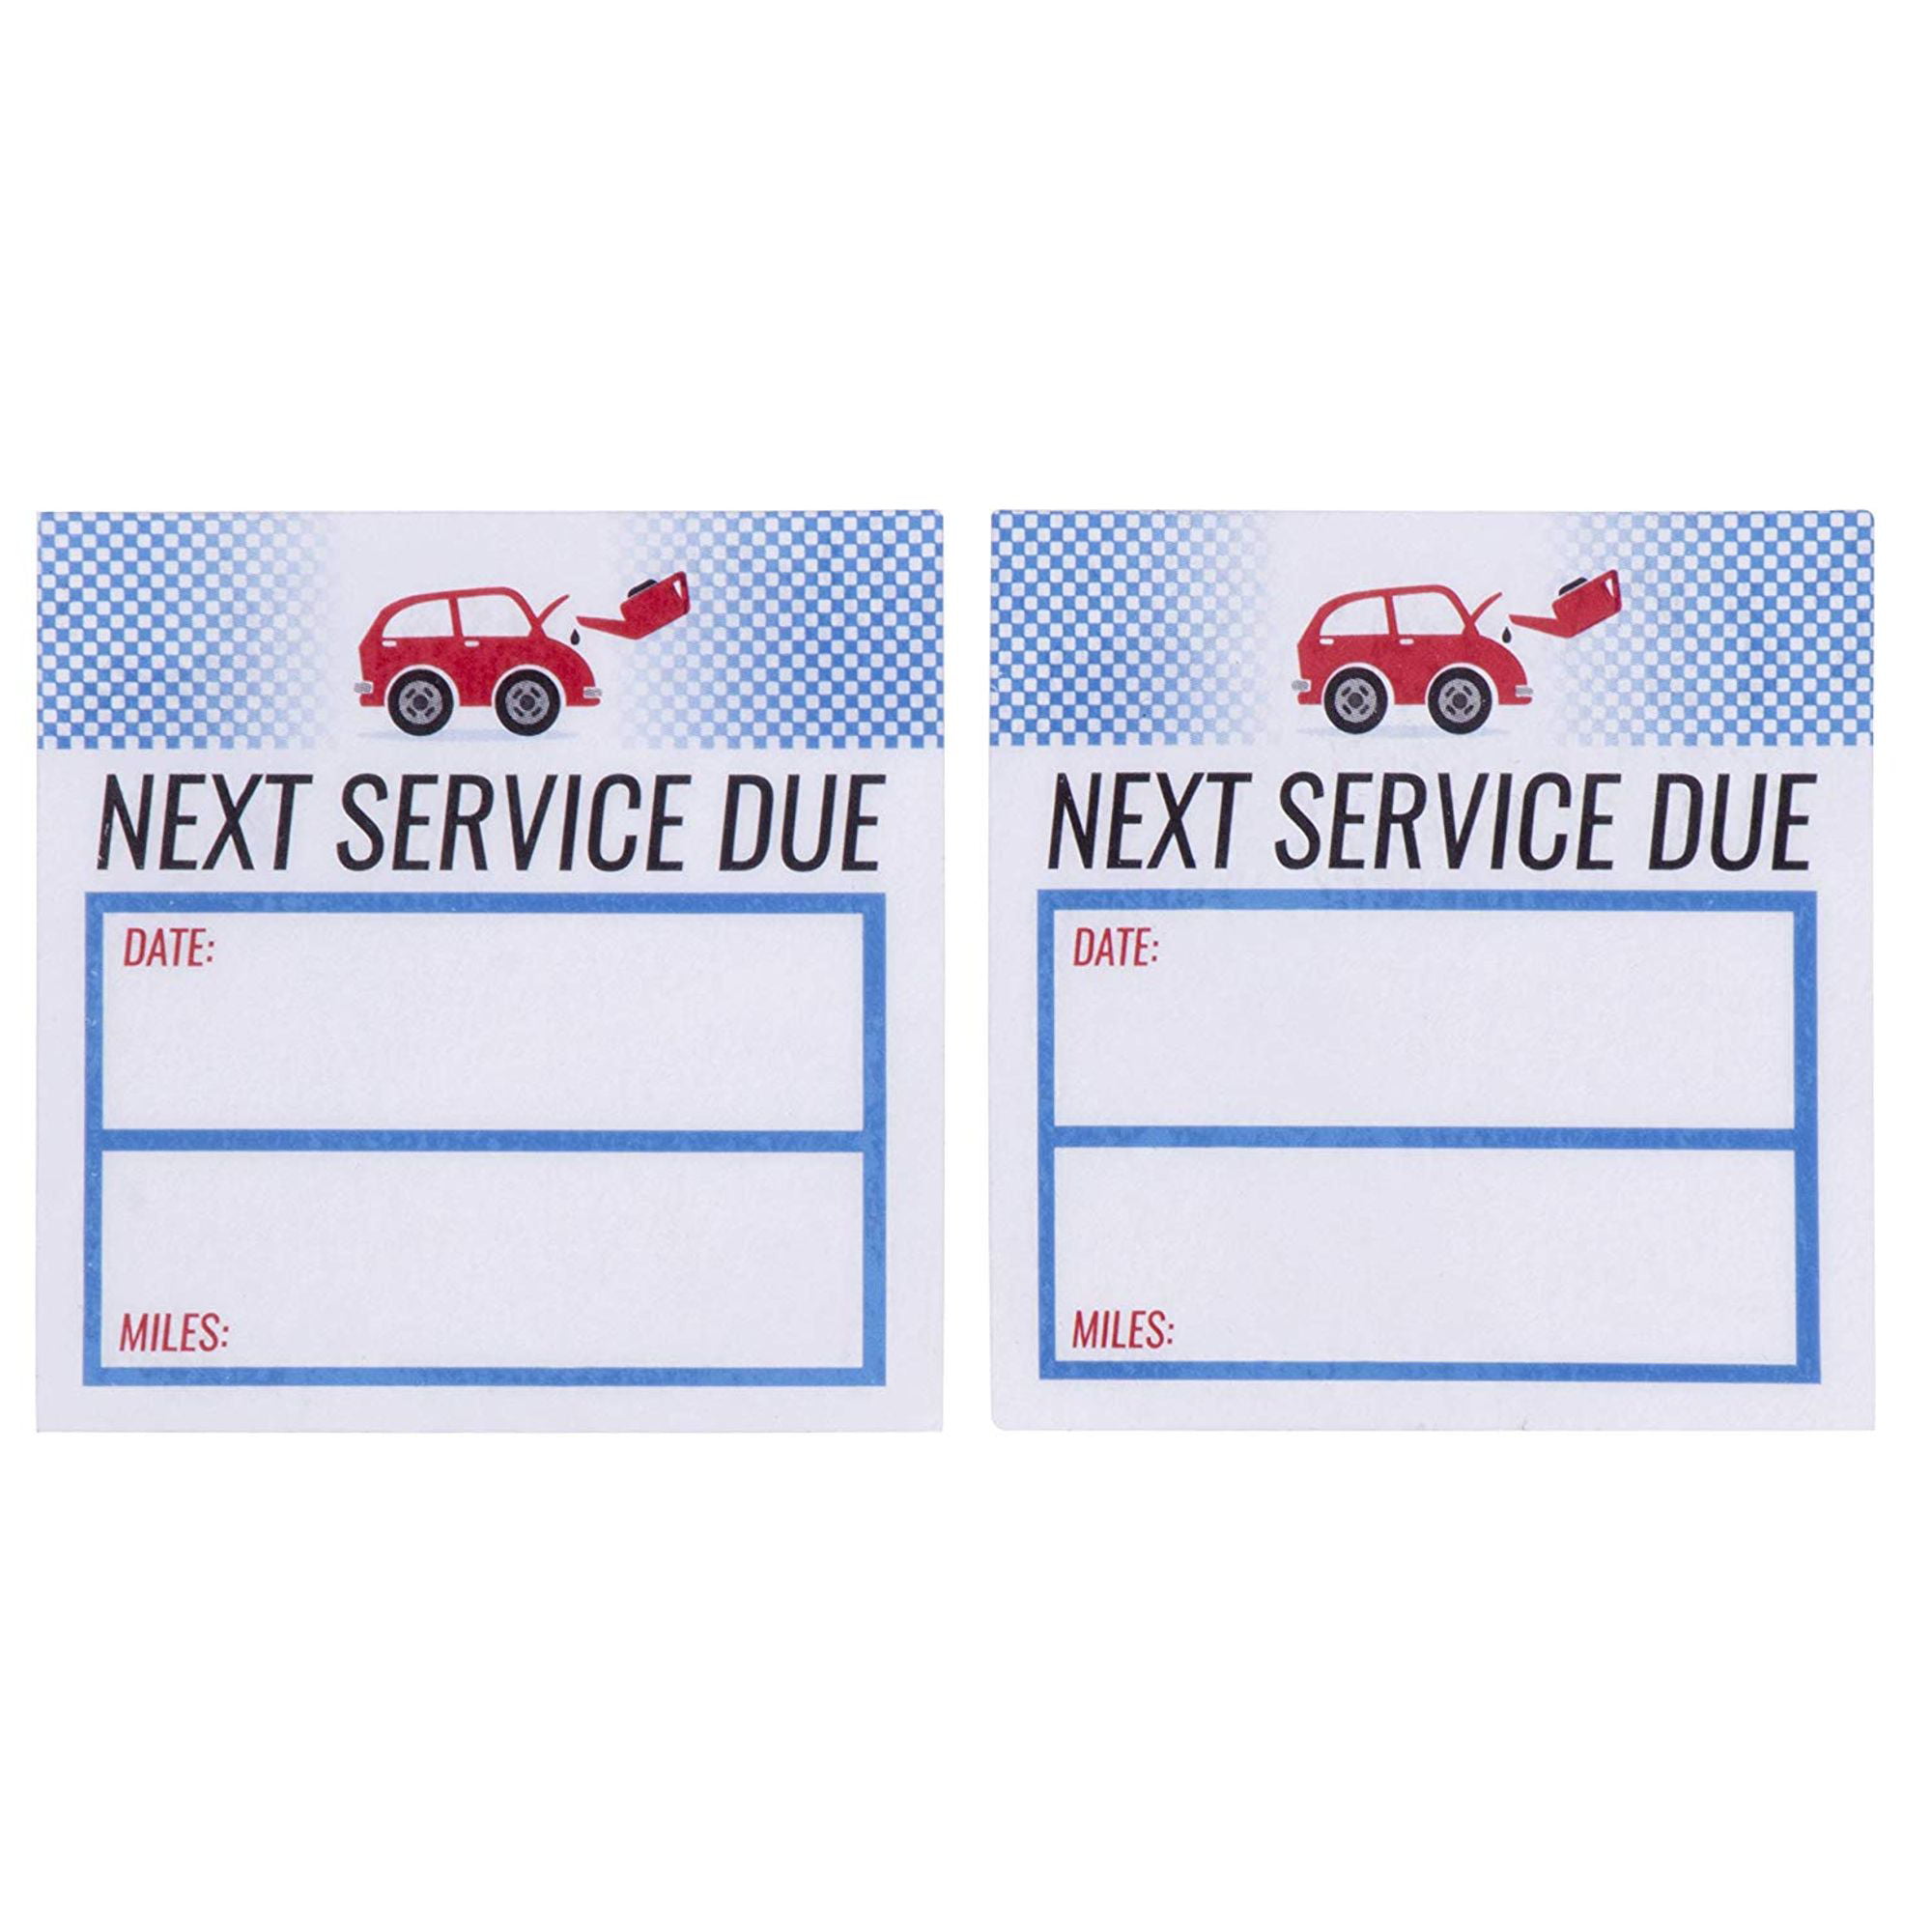 50x AMSOIL Oil Change Service Reminder Stickers Decals Adhesive Labels Die Cut 